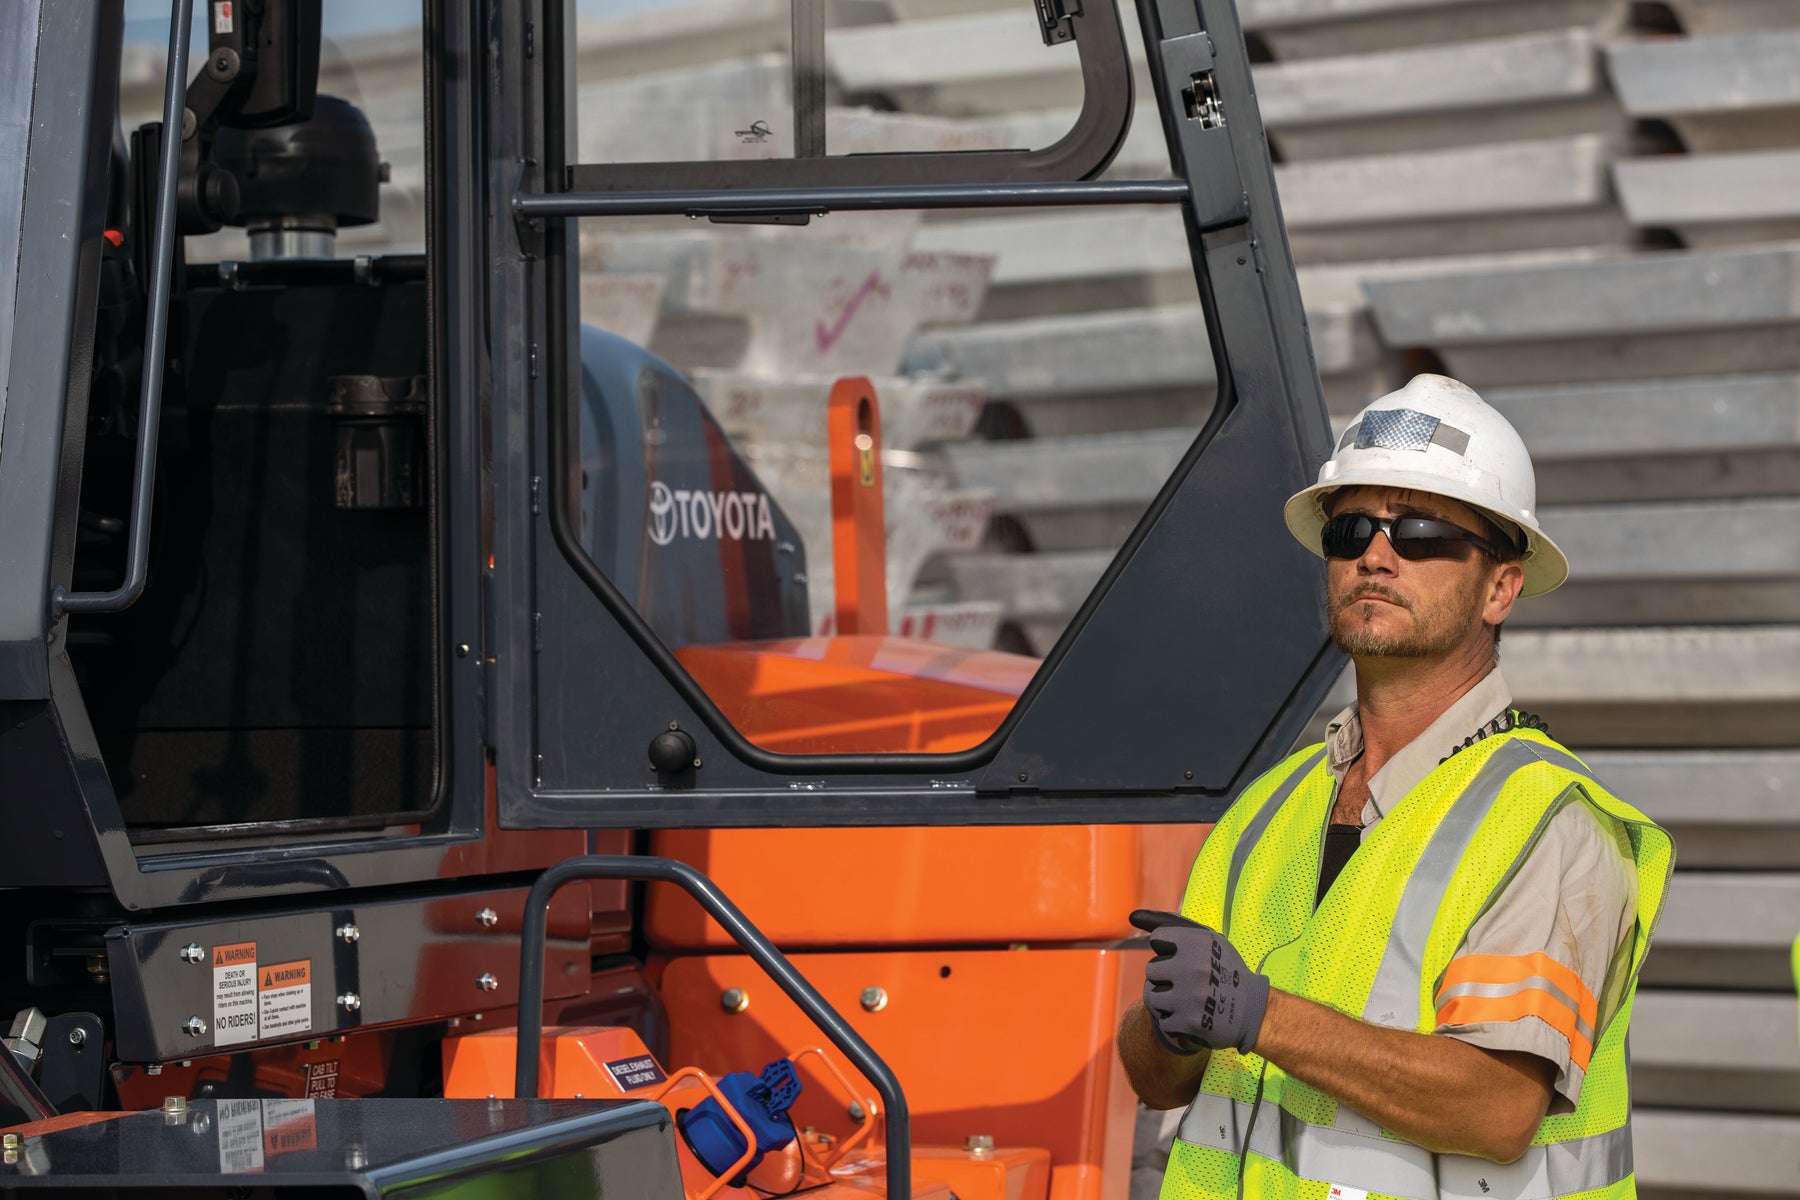 Is Workplace Stress a Risk for Forklift Operators? Part 1